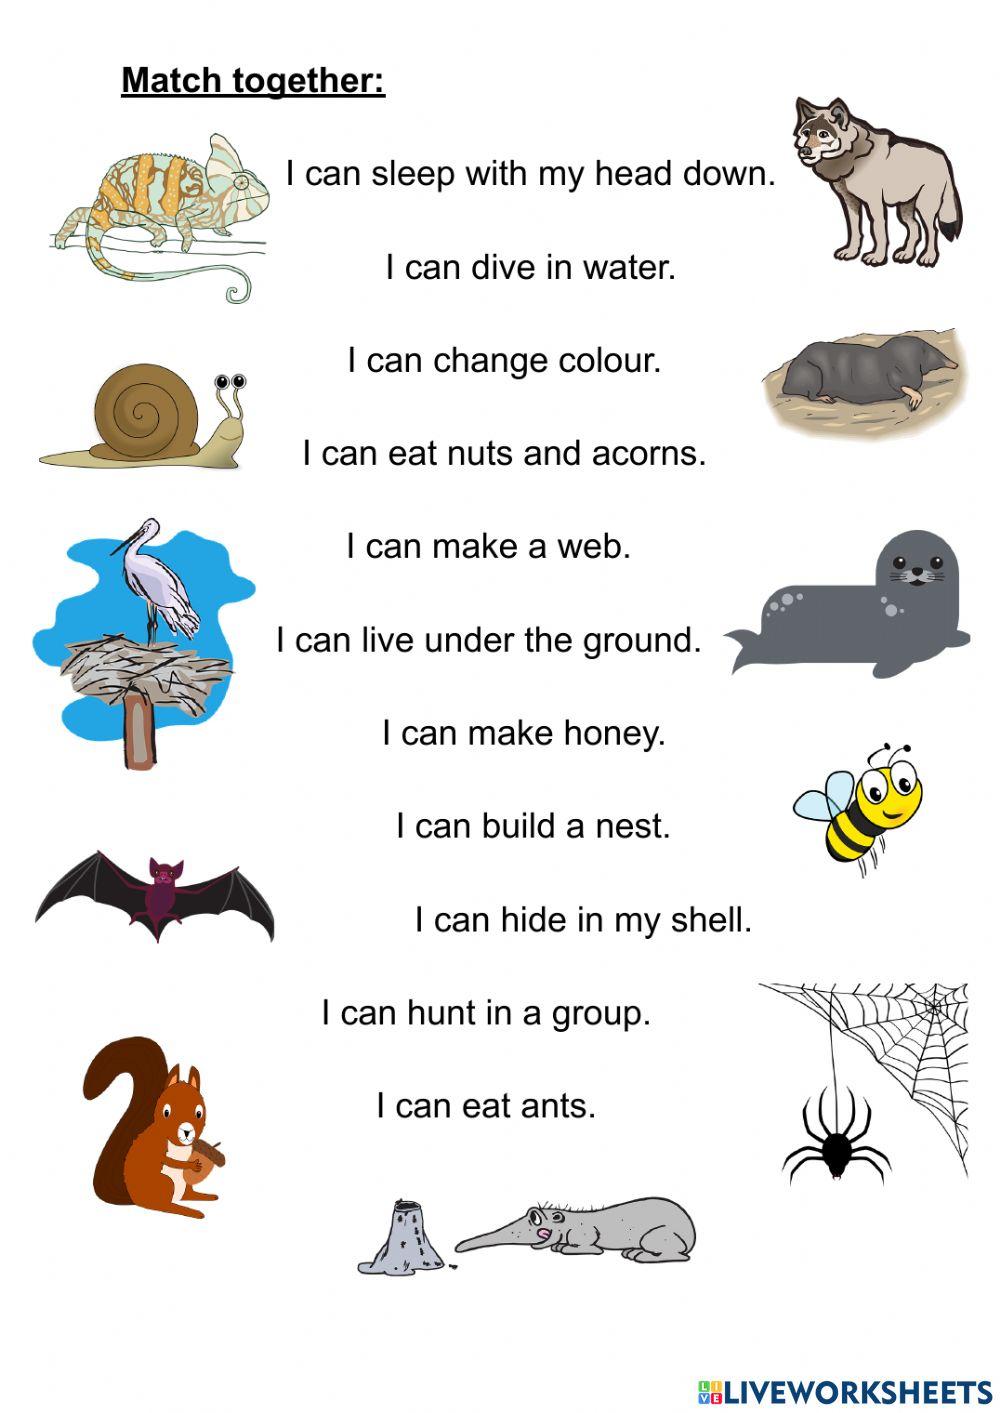 What can animals do? 2